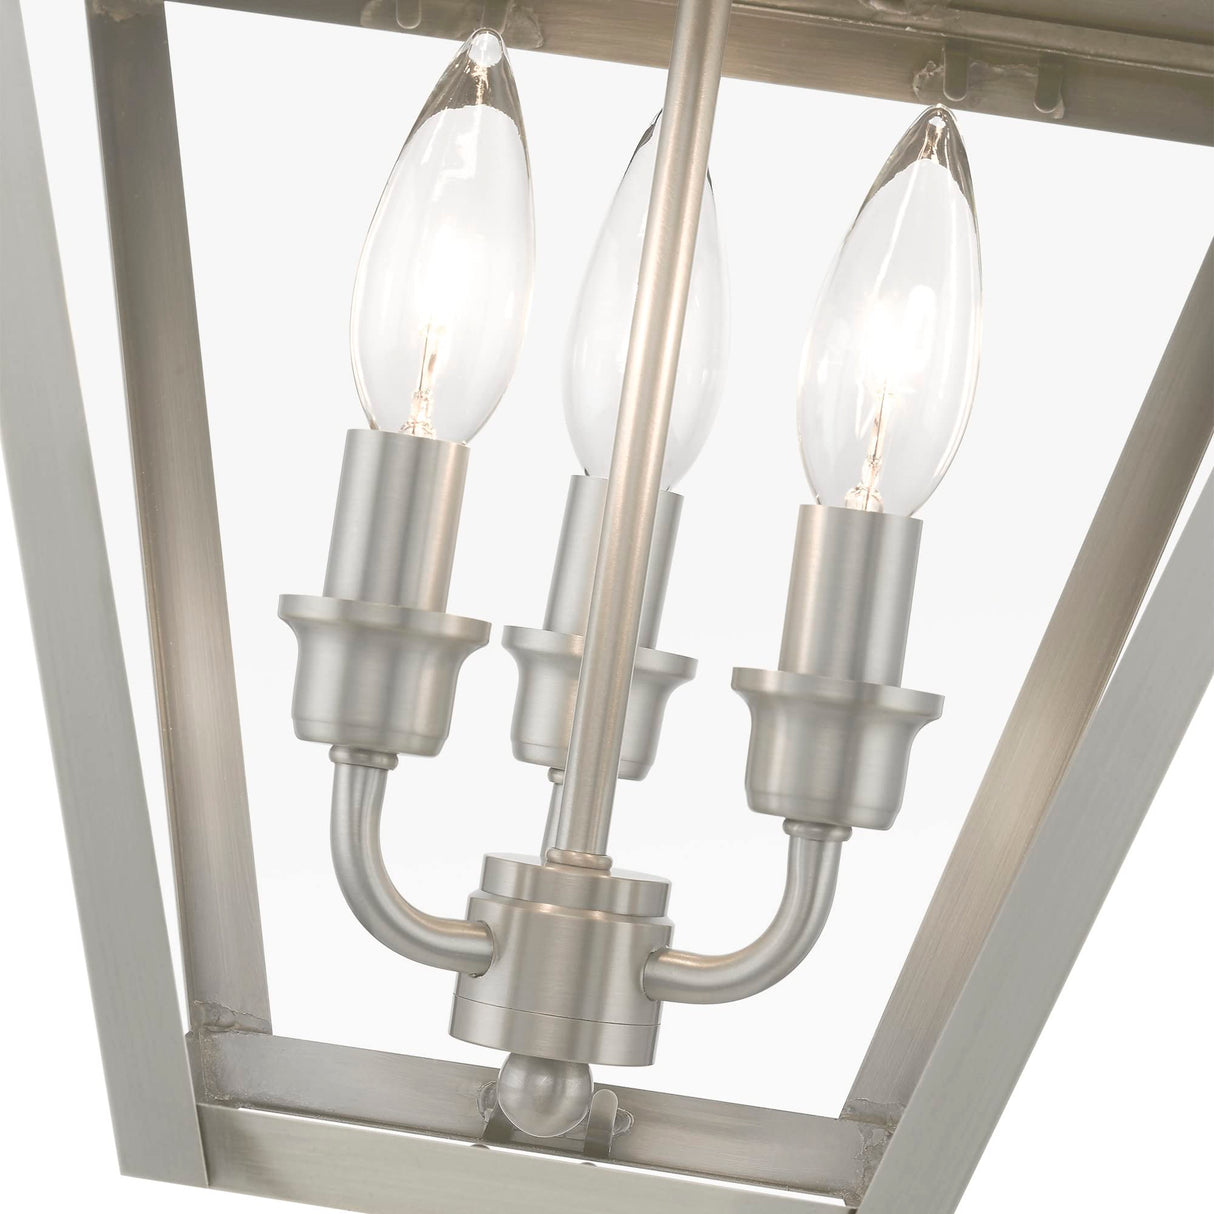 Wentworth 3 Light Outdoor Pendant in Bronze with Antique Brass (27220-07)